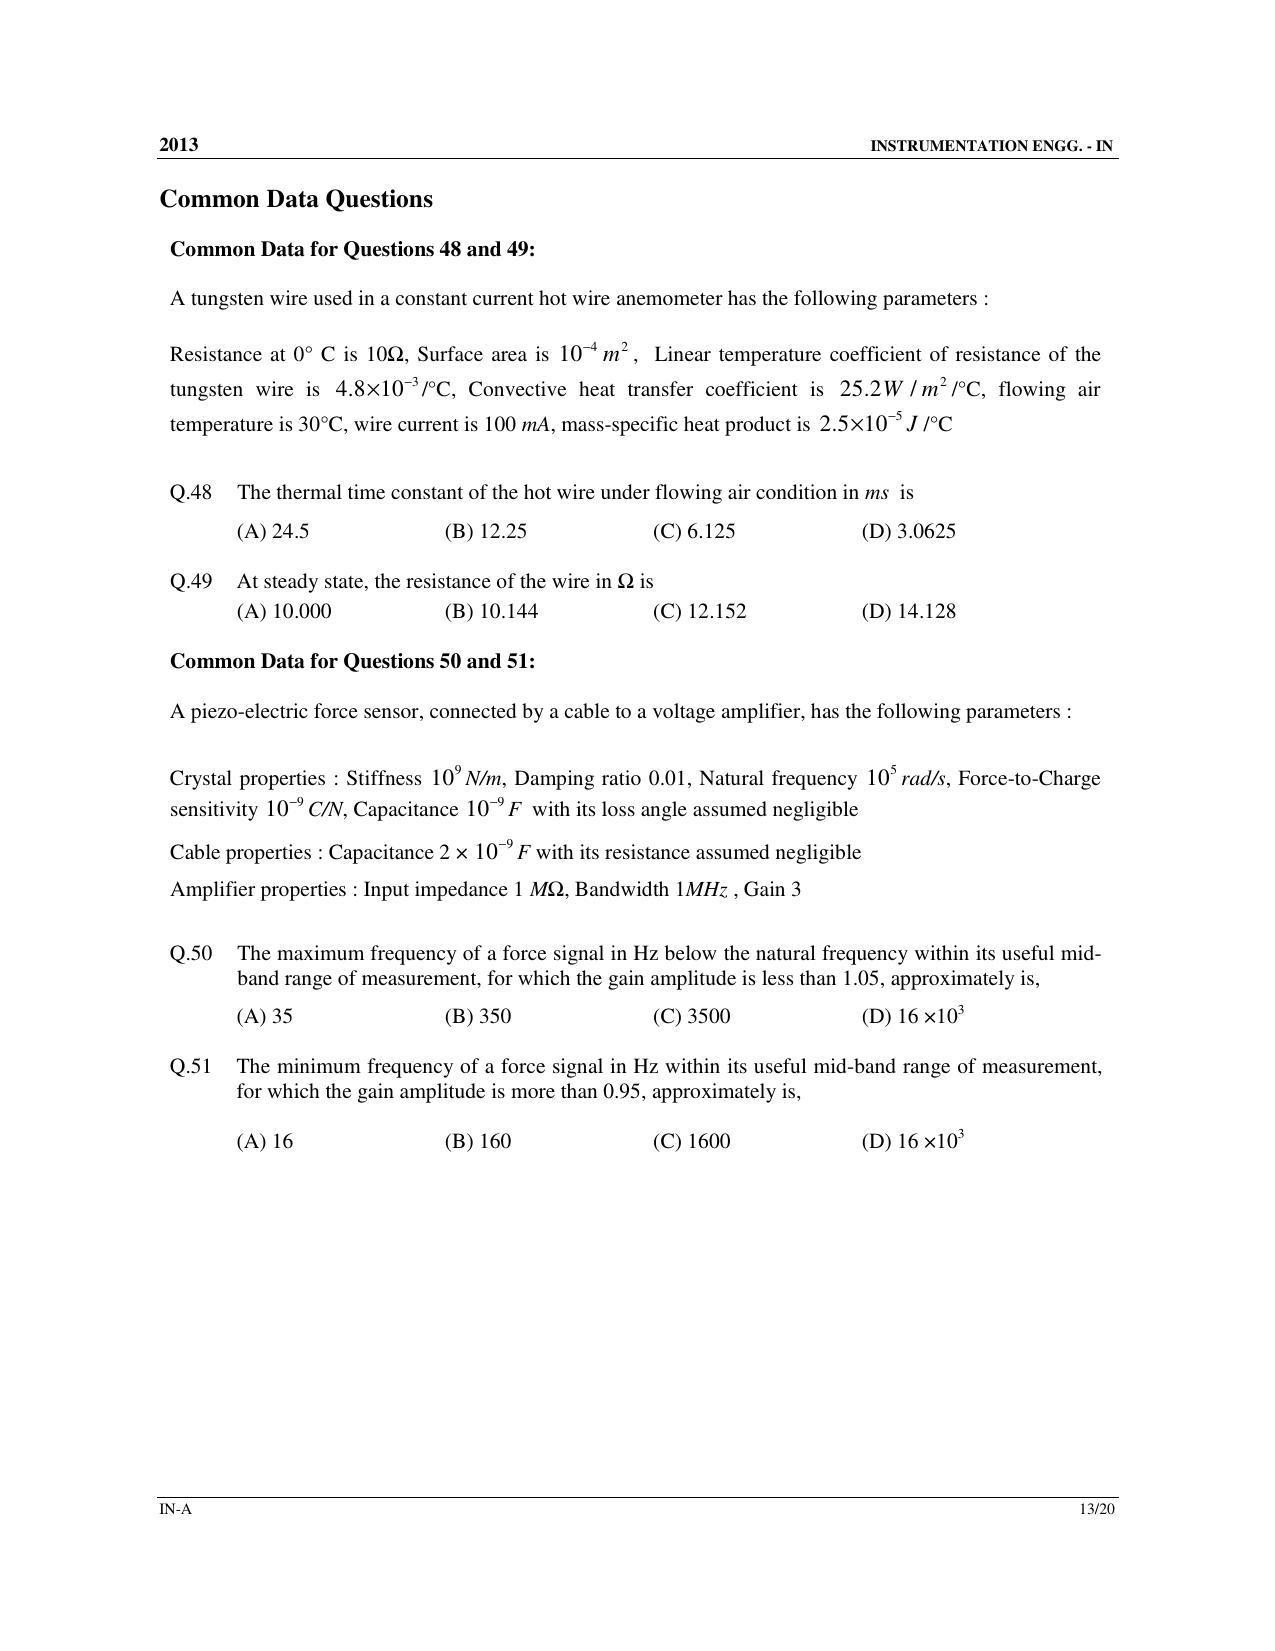 GATE 2013 Instrumentation Engineering (IN) Question Paper with Answer Key - Page 14